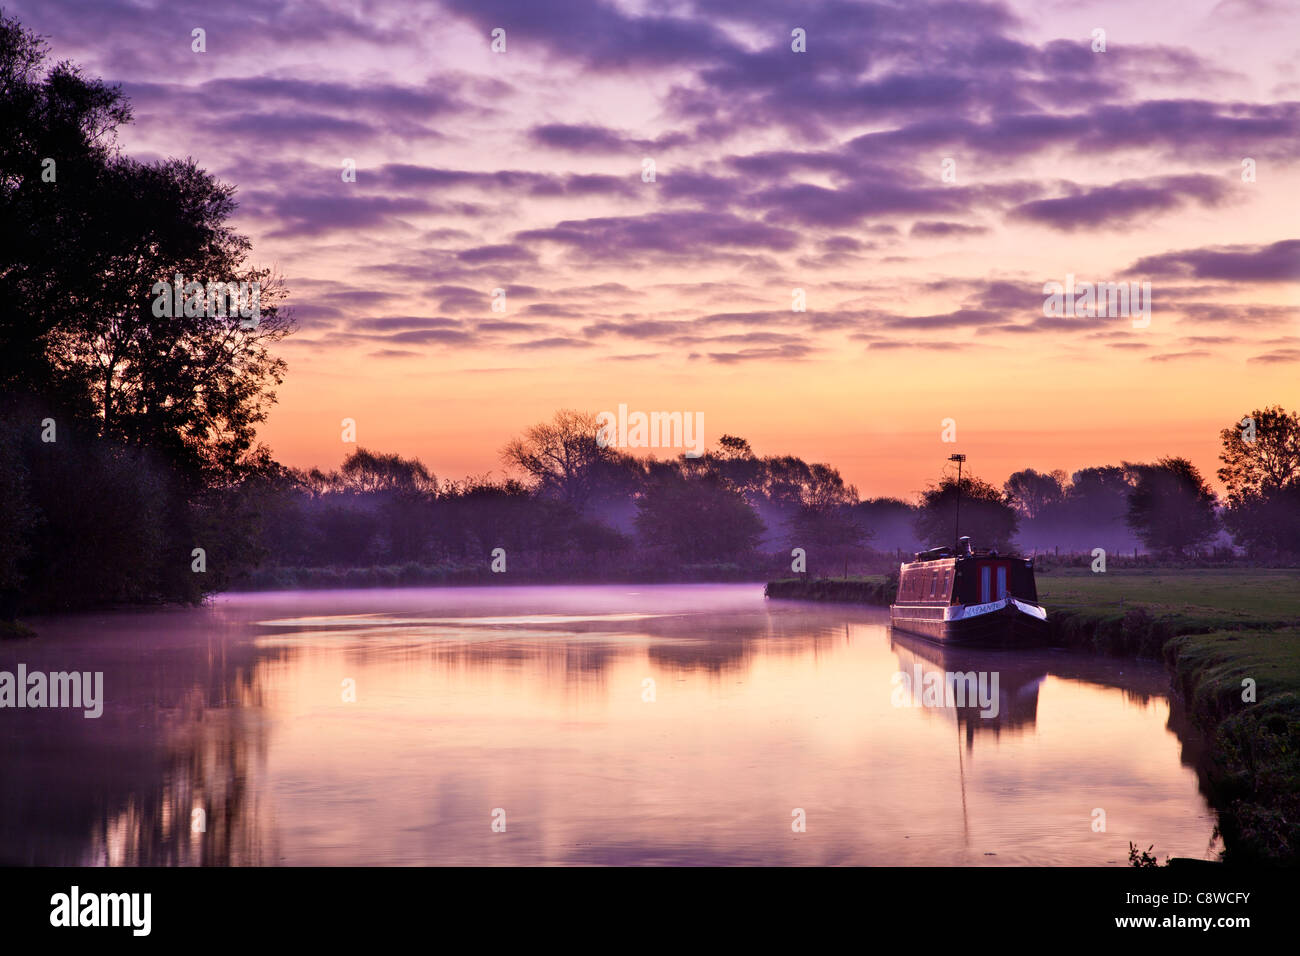 A misty Cotswold autumn sunrise on the River Thames at Lechlade, Gloucestershire, England, UK Stock Photo